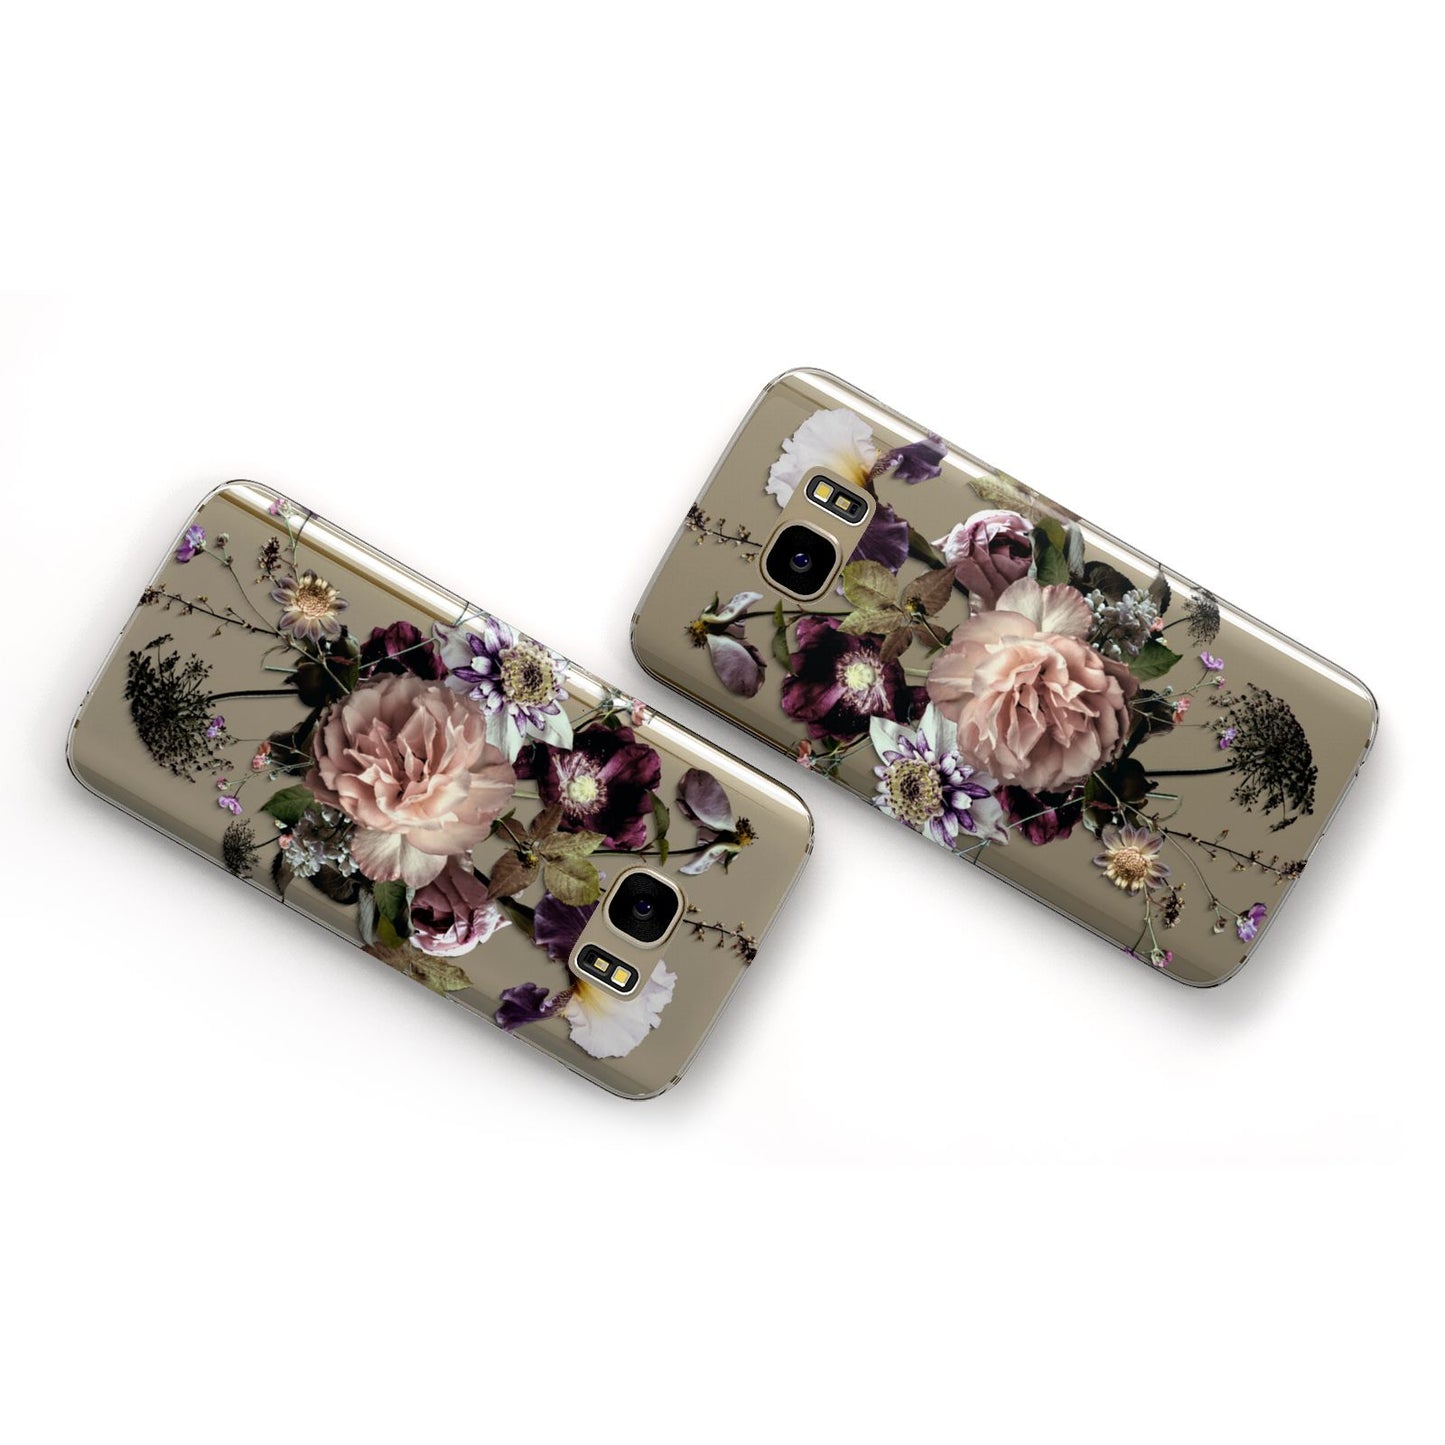 Vintage Flowers Samsung Galaxy Case Flat Overview